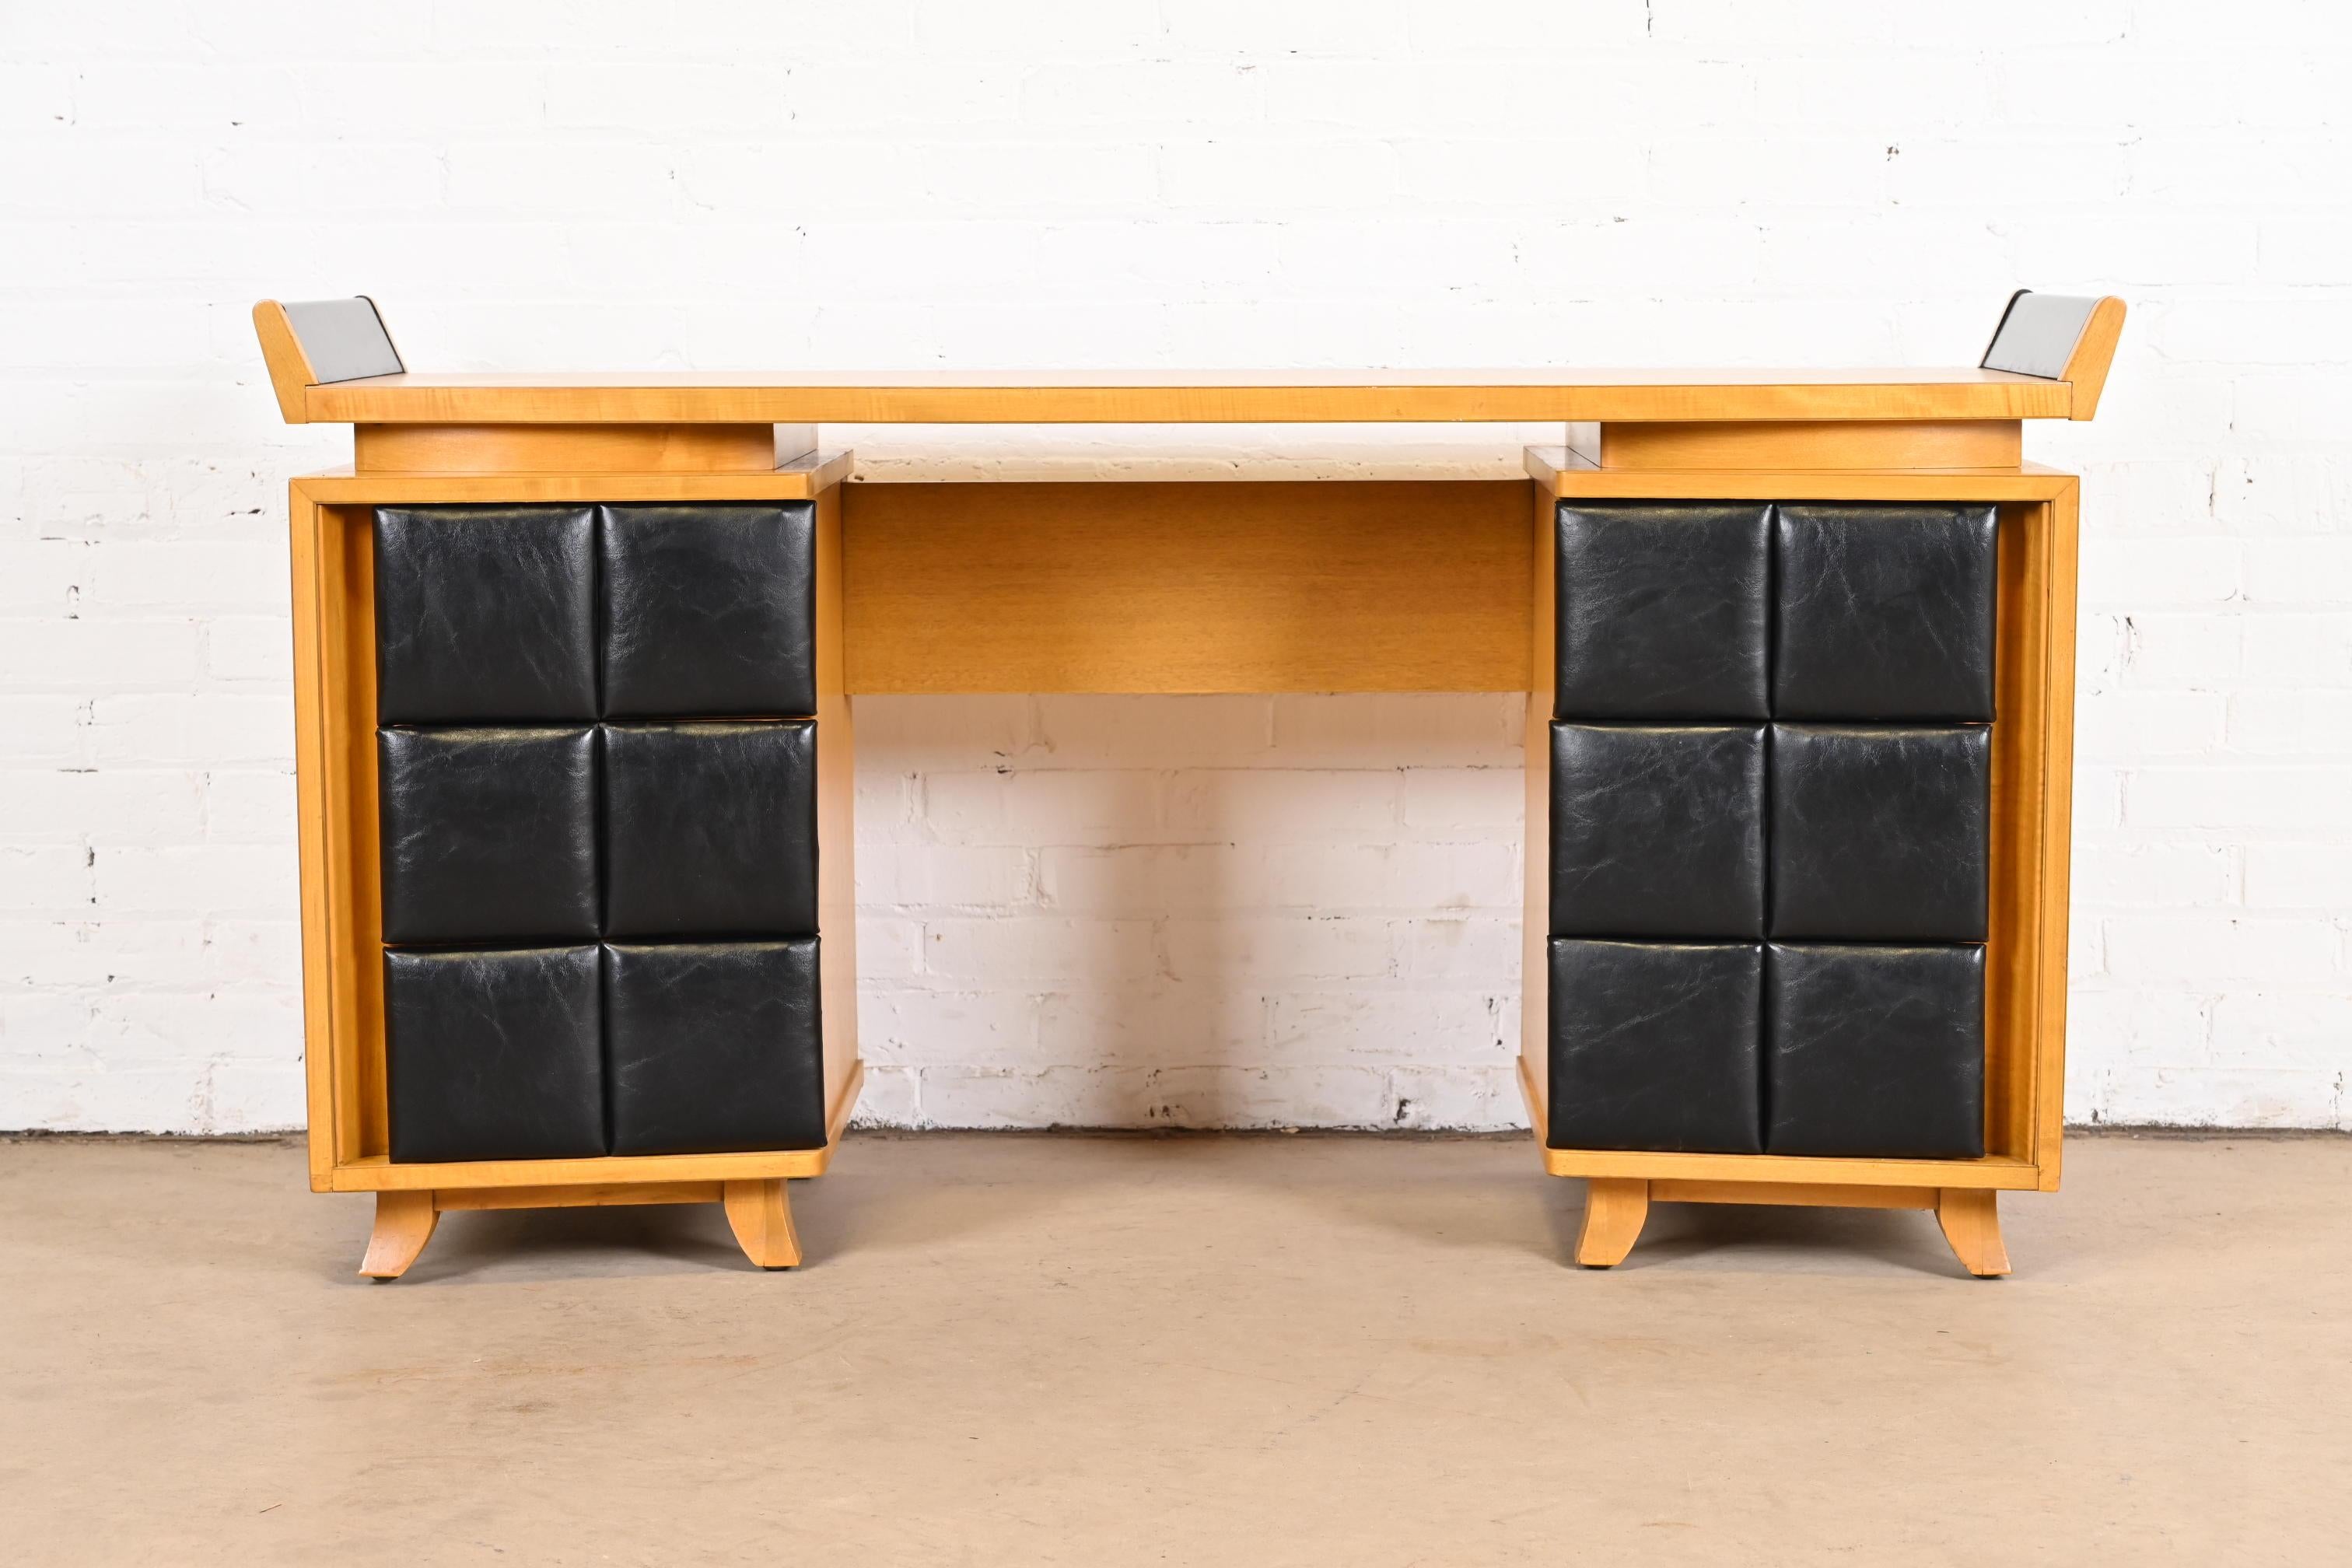 An exceptional Art Deco or Mid-Century Modern vanity or desk

By Gilbert Rohde for Herman Miller

USA, 1930s

Mahogany, with black leatherette drawer fronts and black lacquered 